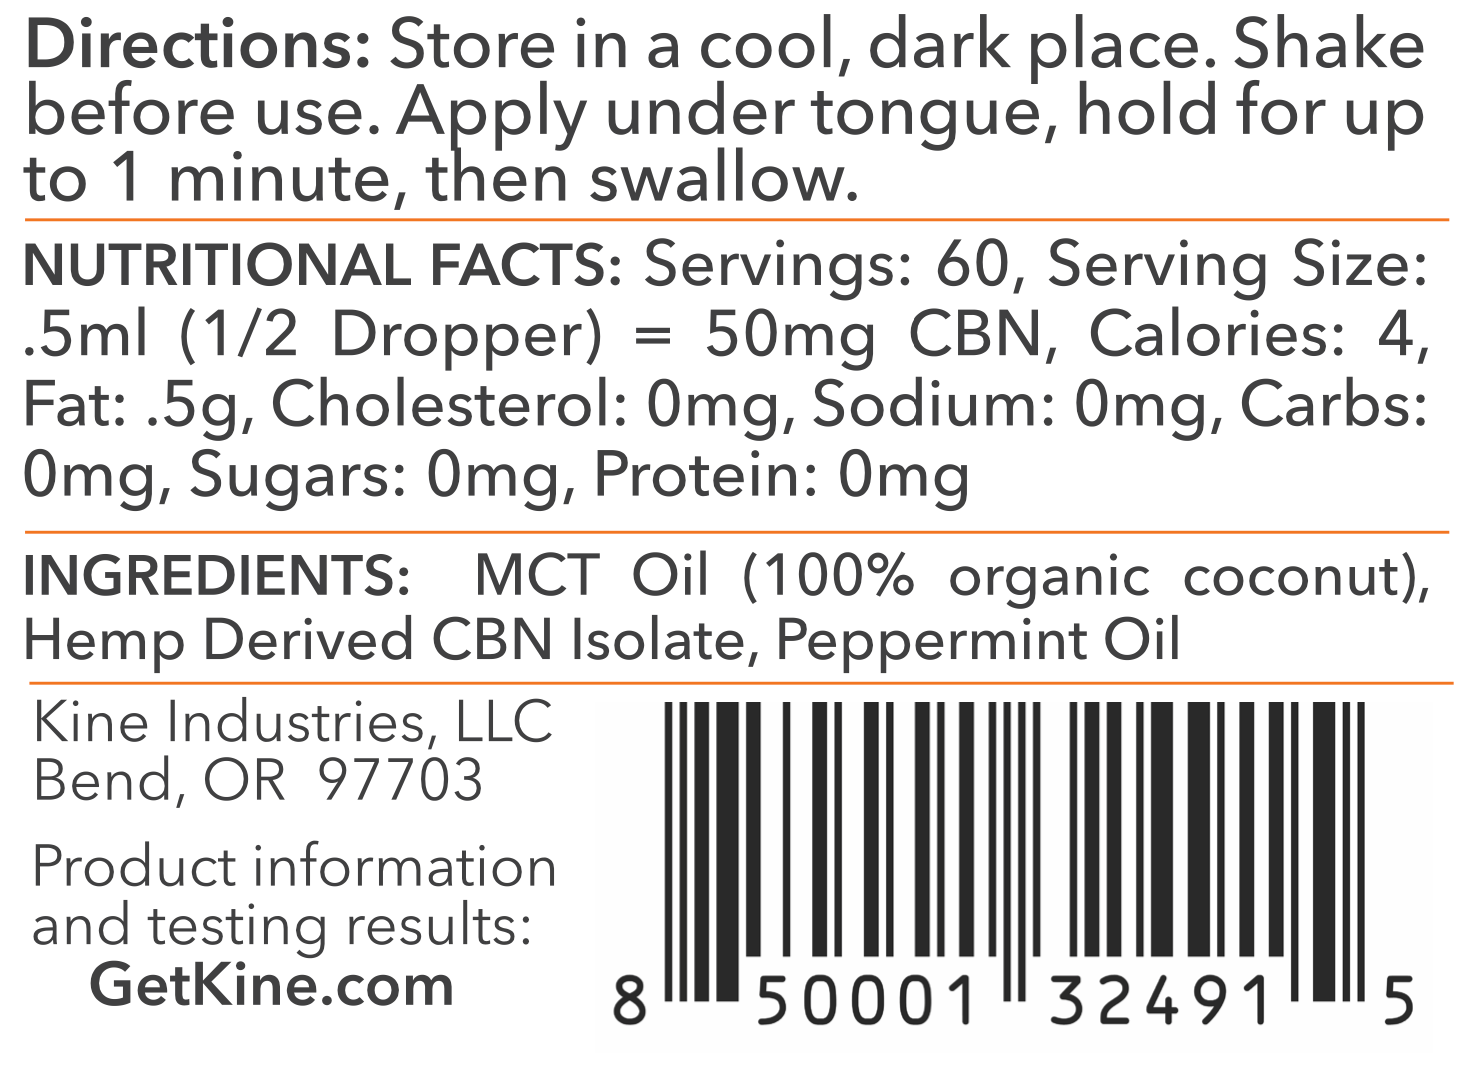 Kine Mint Flavored Organic CBN 3000mg tincture drops ingredients list and nutritional facts